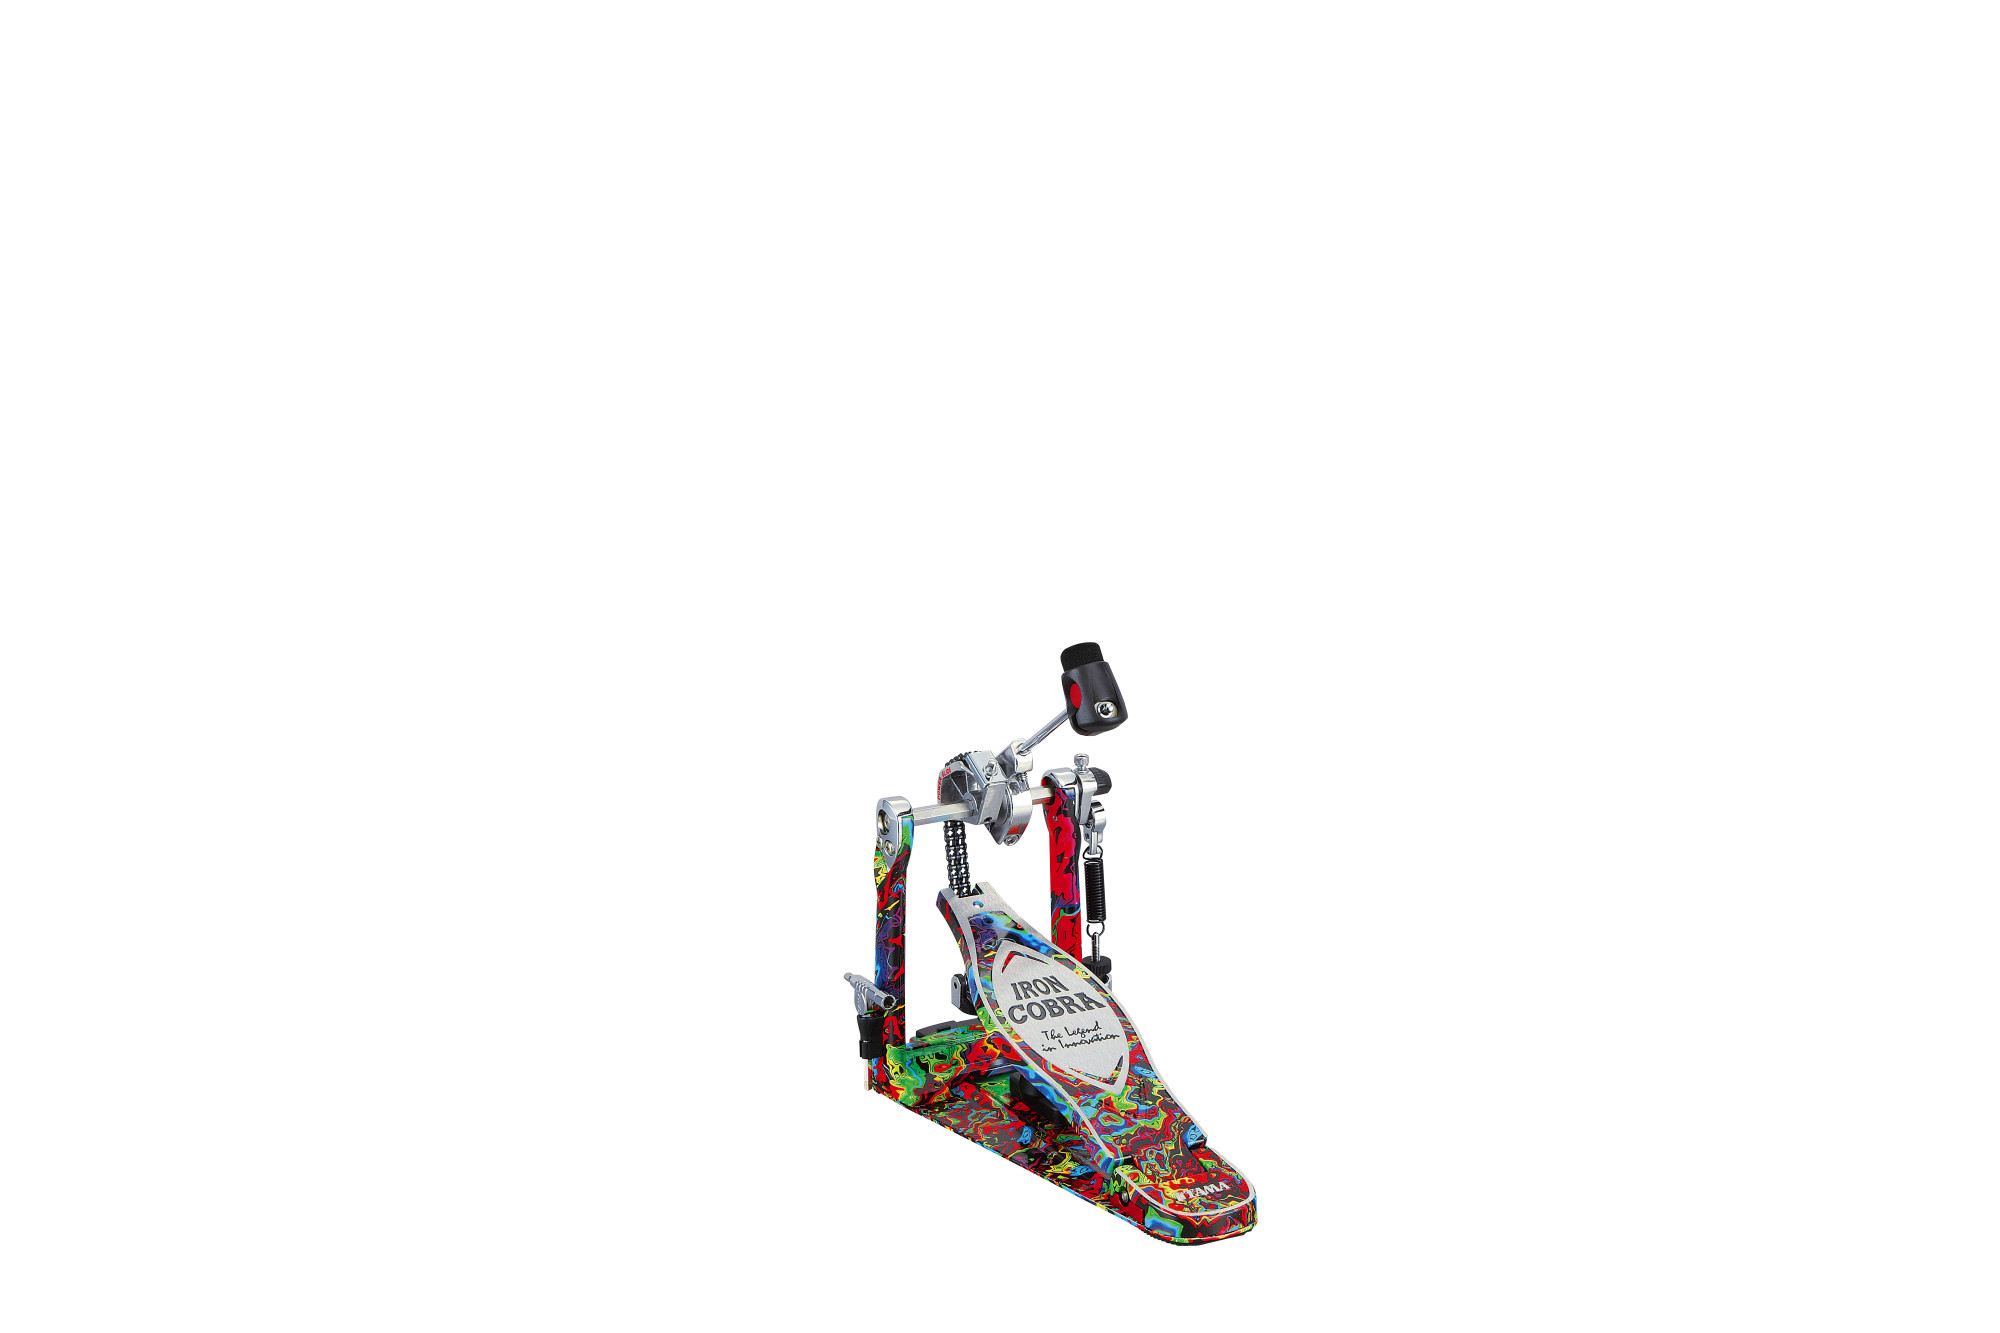 HP900PMPR 50th Limited Iron Cobra Power Glide Single Pedal - Marble Psychedelic Rainbow Finish